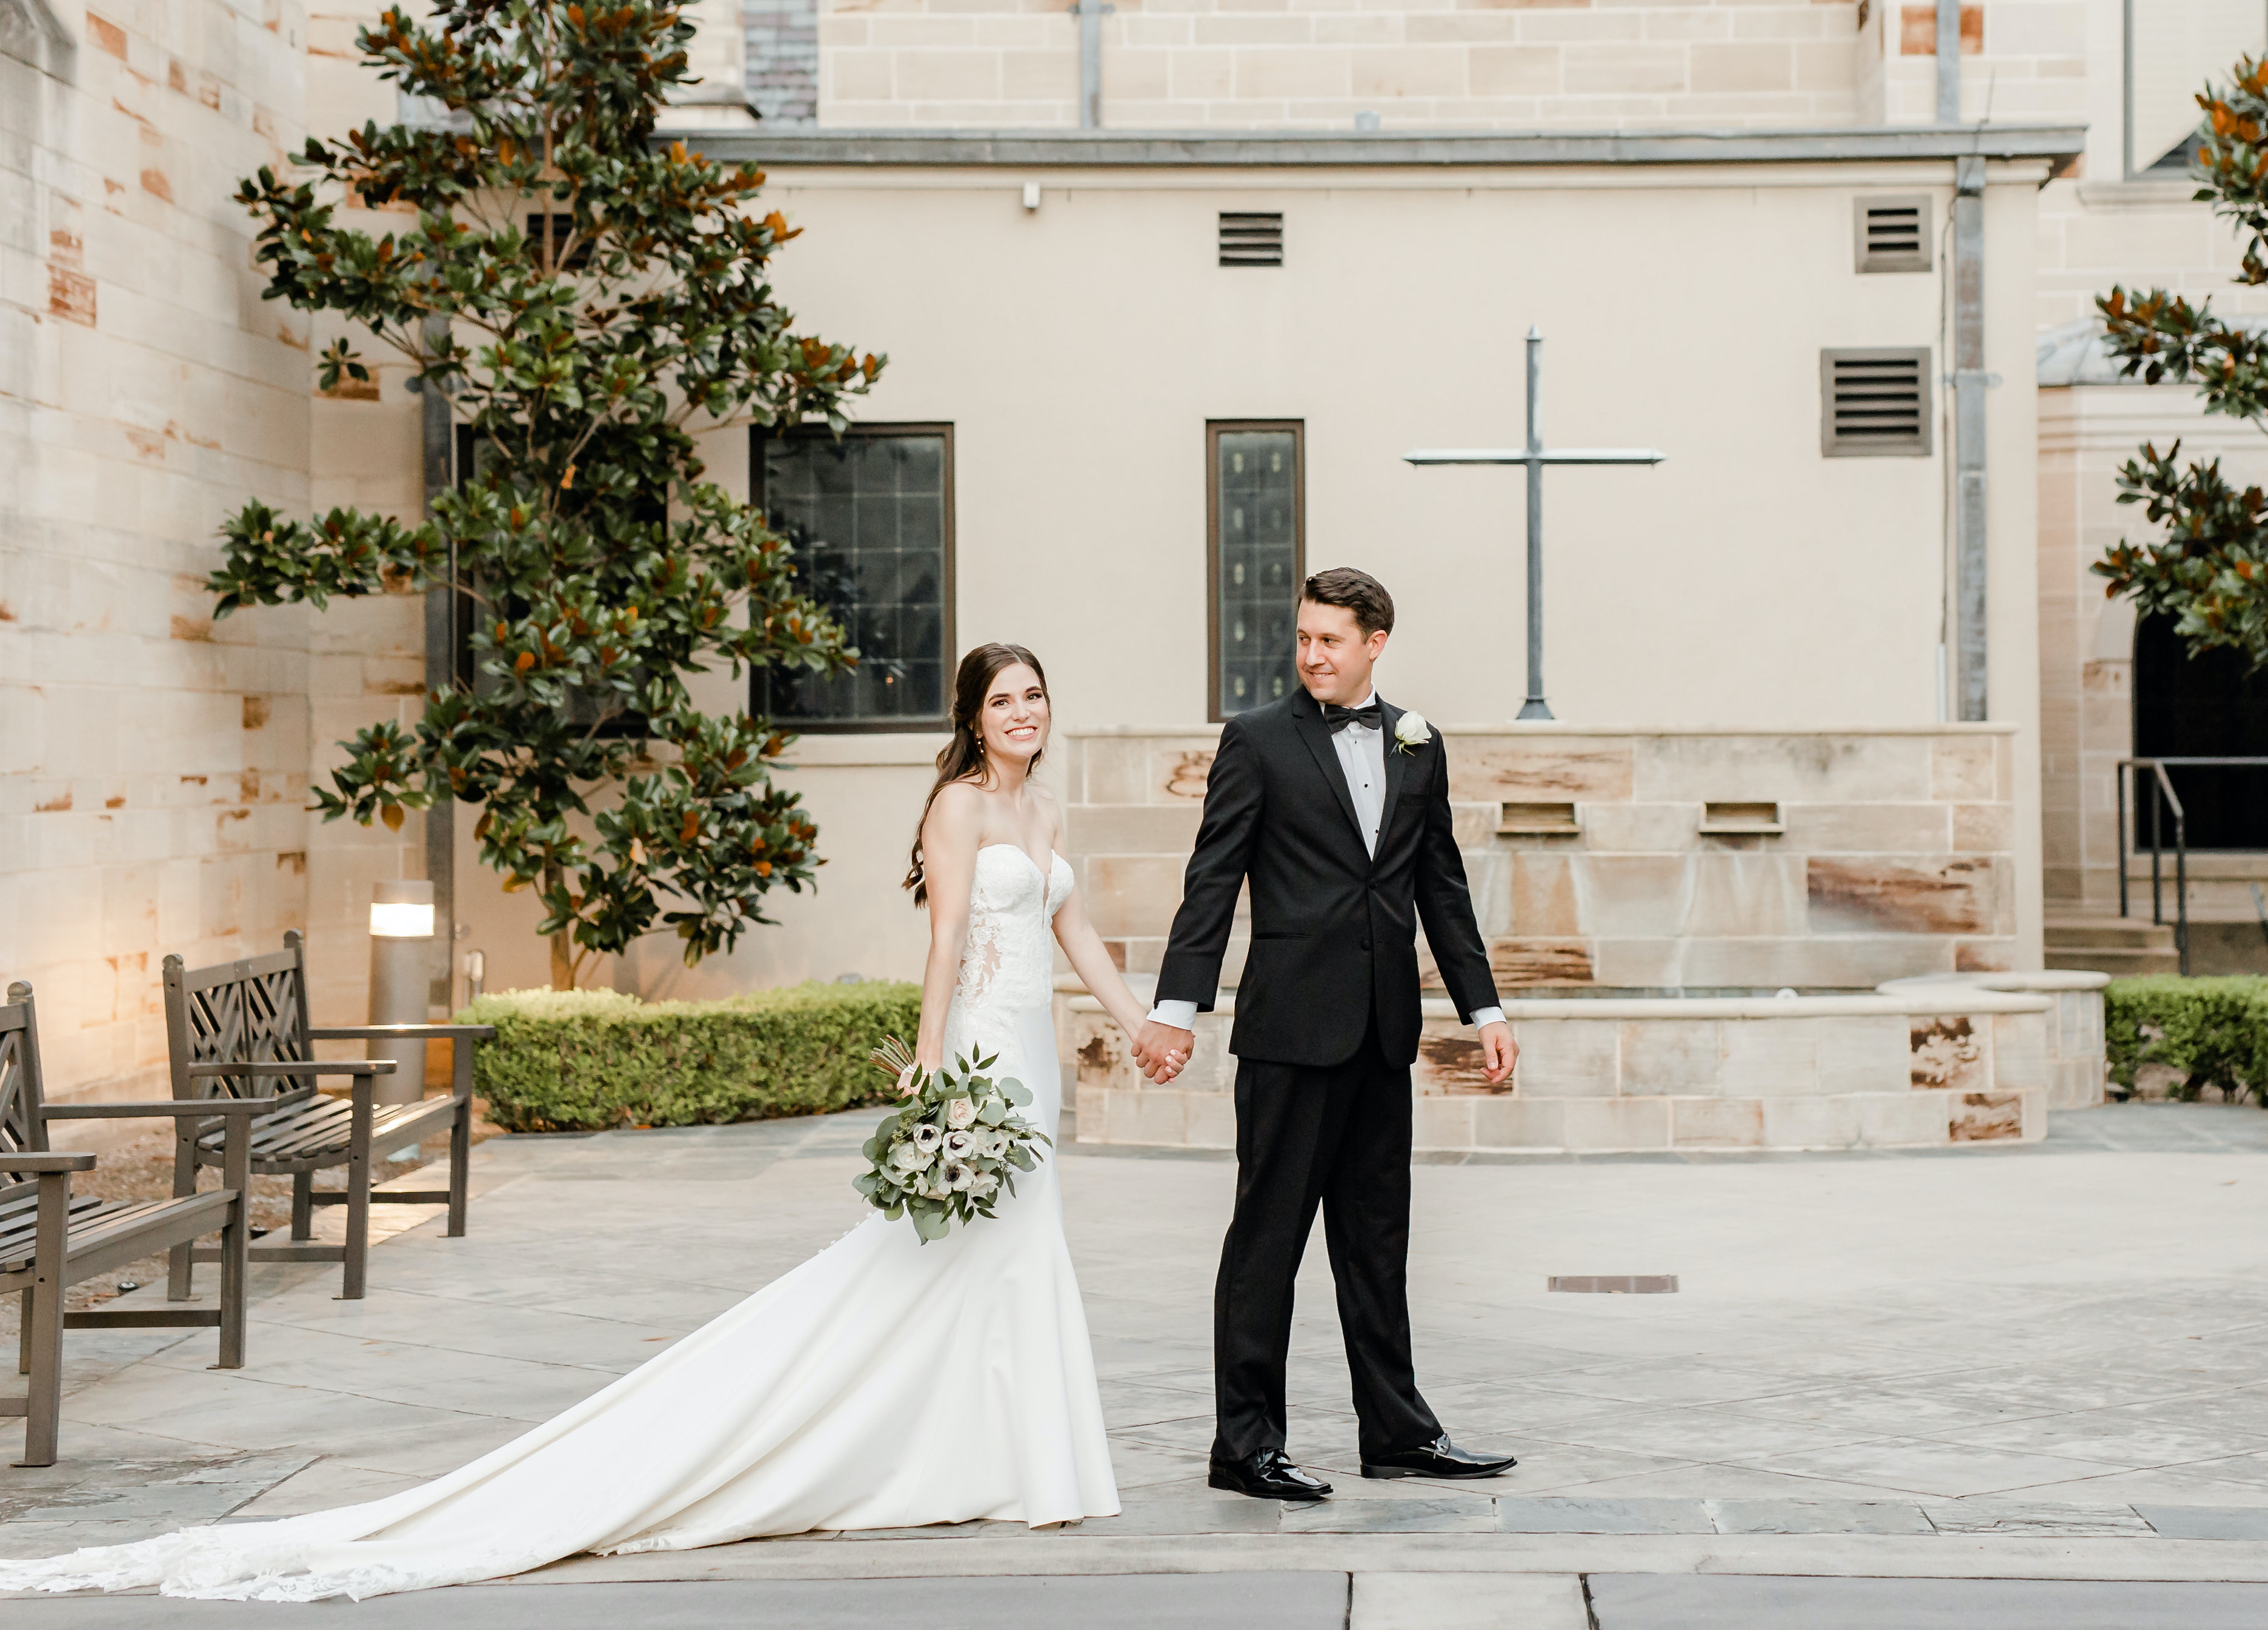 A groom holds hands with his bride as they walk in a courtyard at a church in Houston.